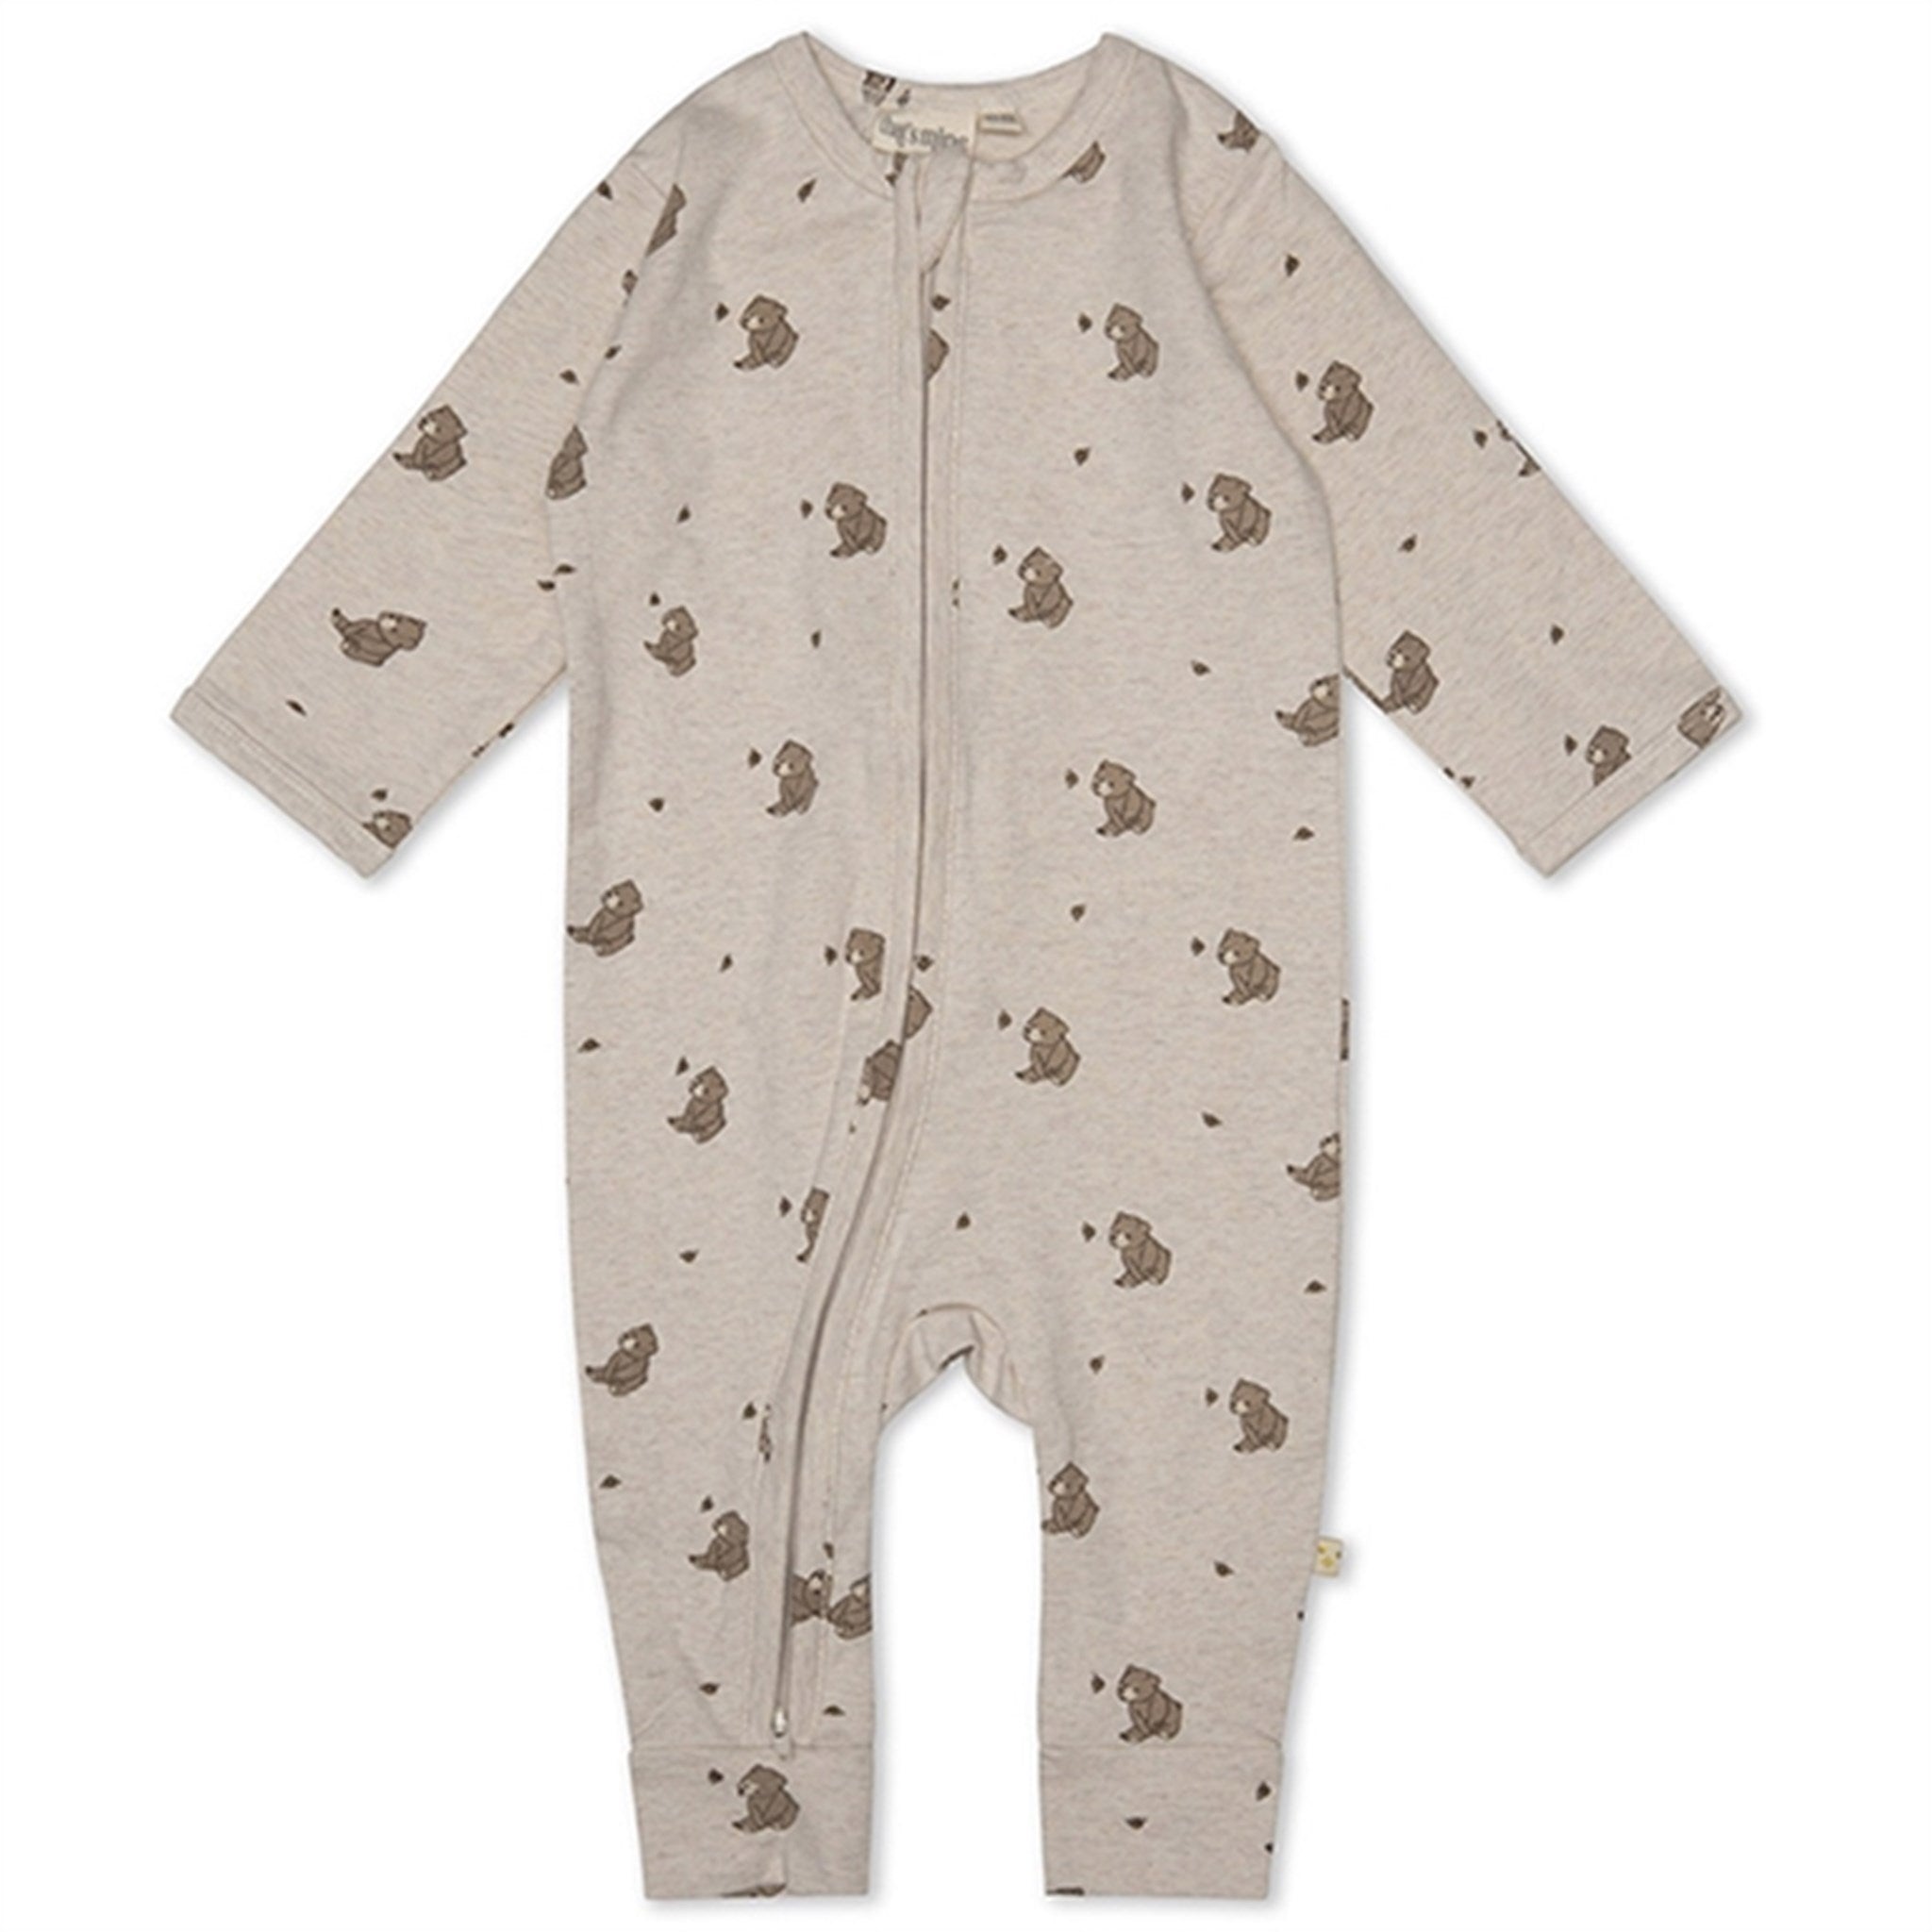 That's Mine Bees and Bears Mathie Onesies